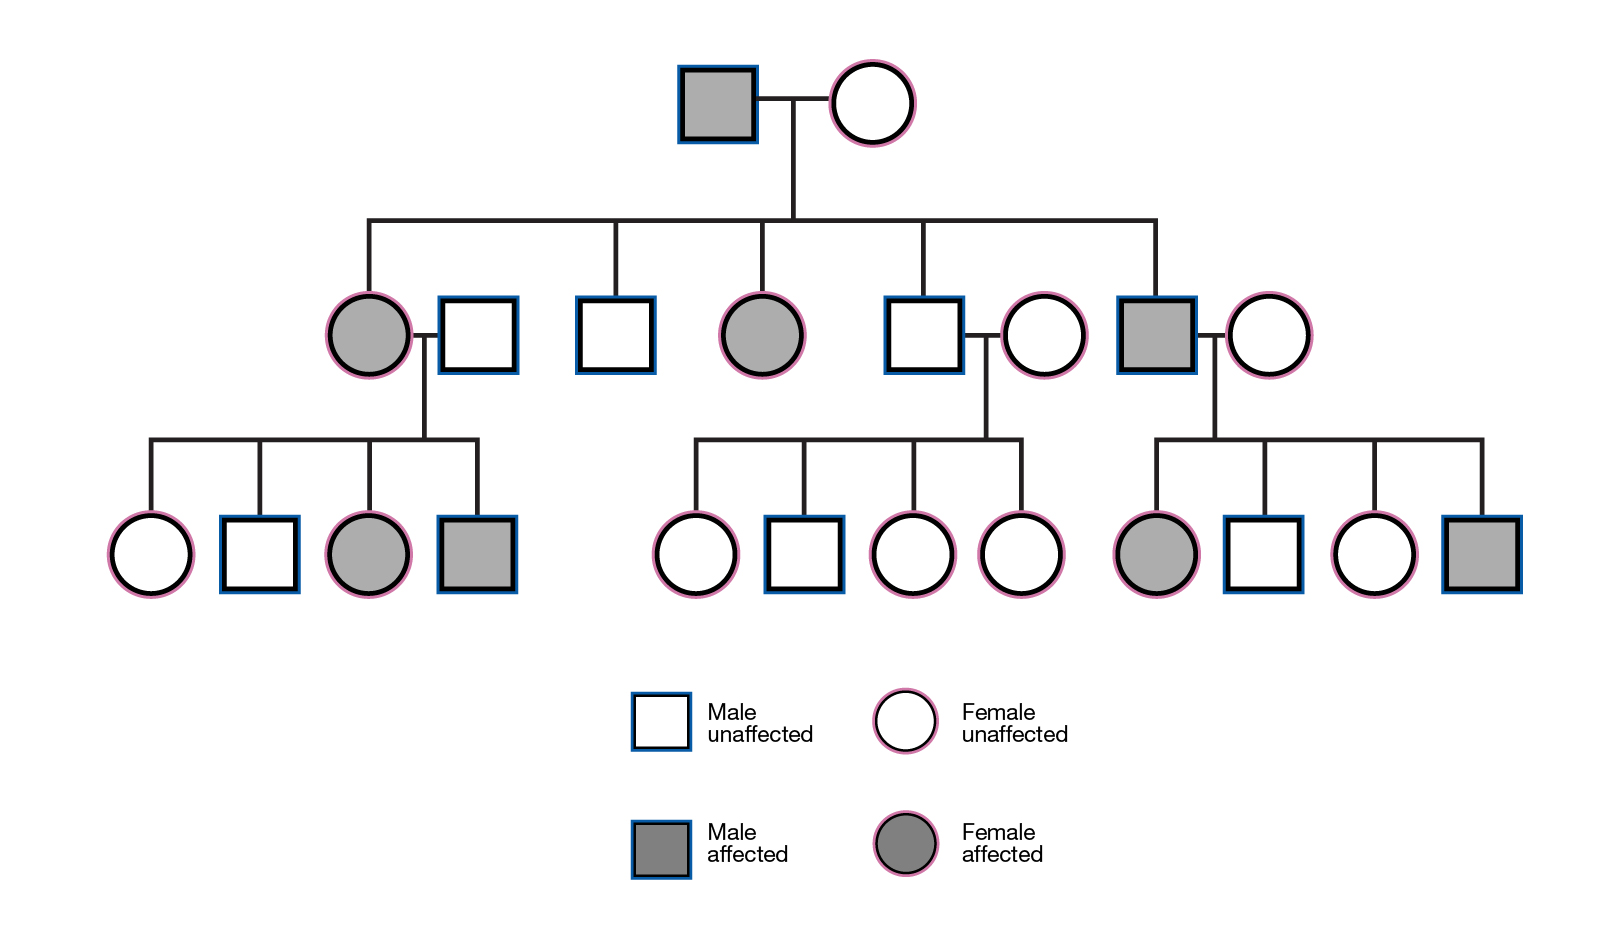 <p>Inheritance pattern where a single copy of a mutated gene from one parent is enough to cause the trait or disorder in an individual.</p>